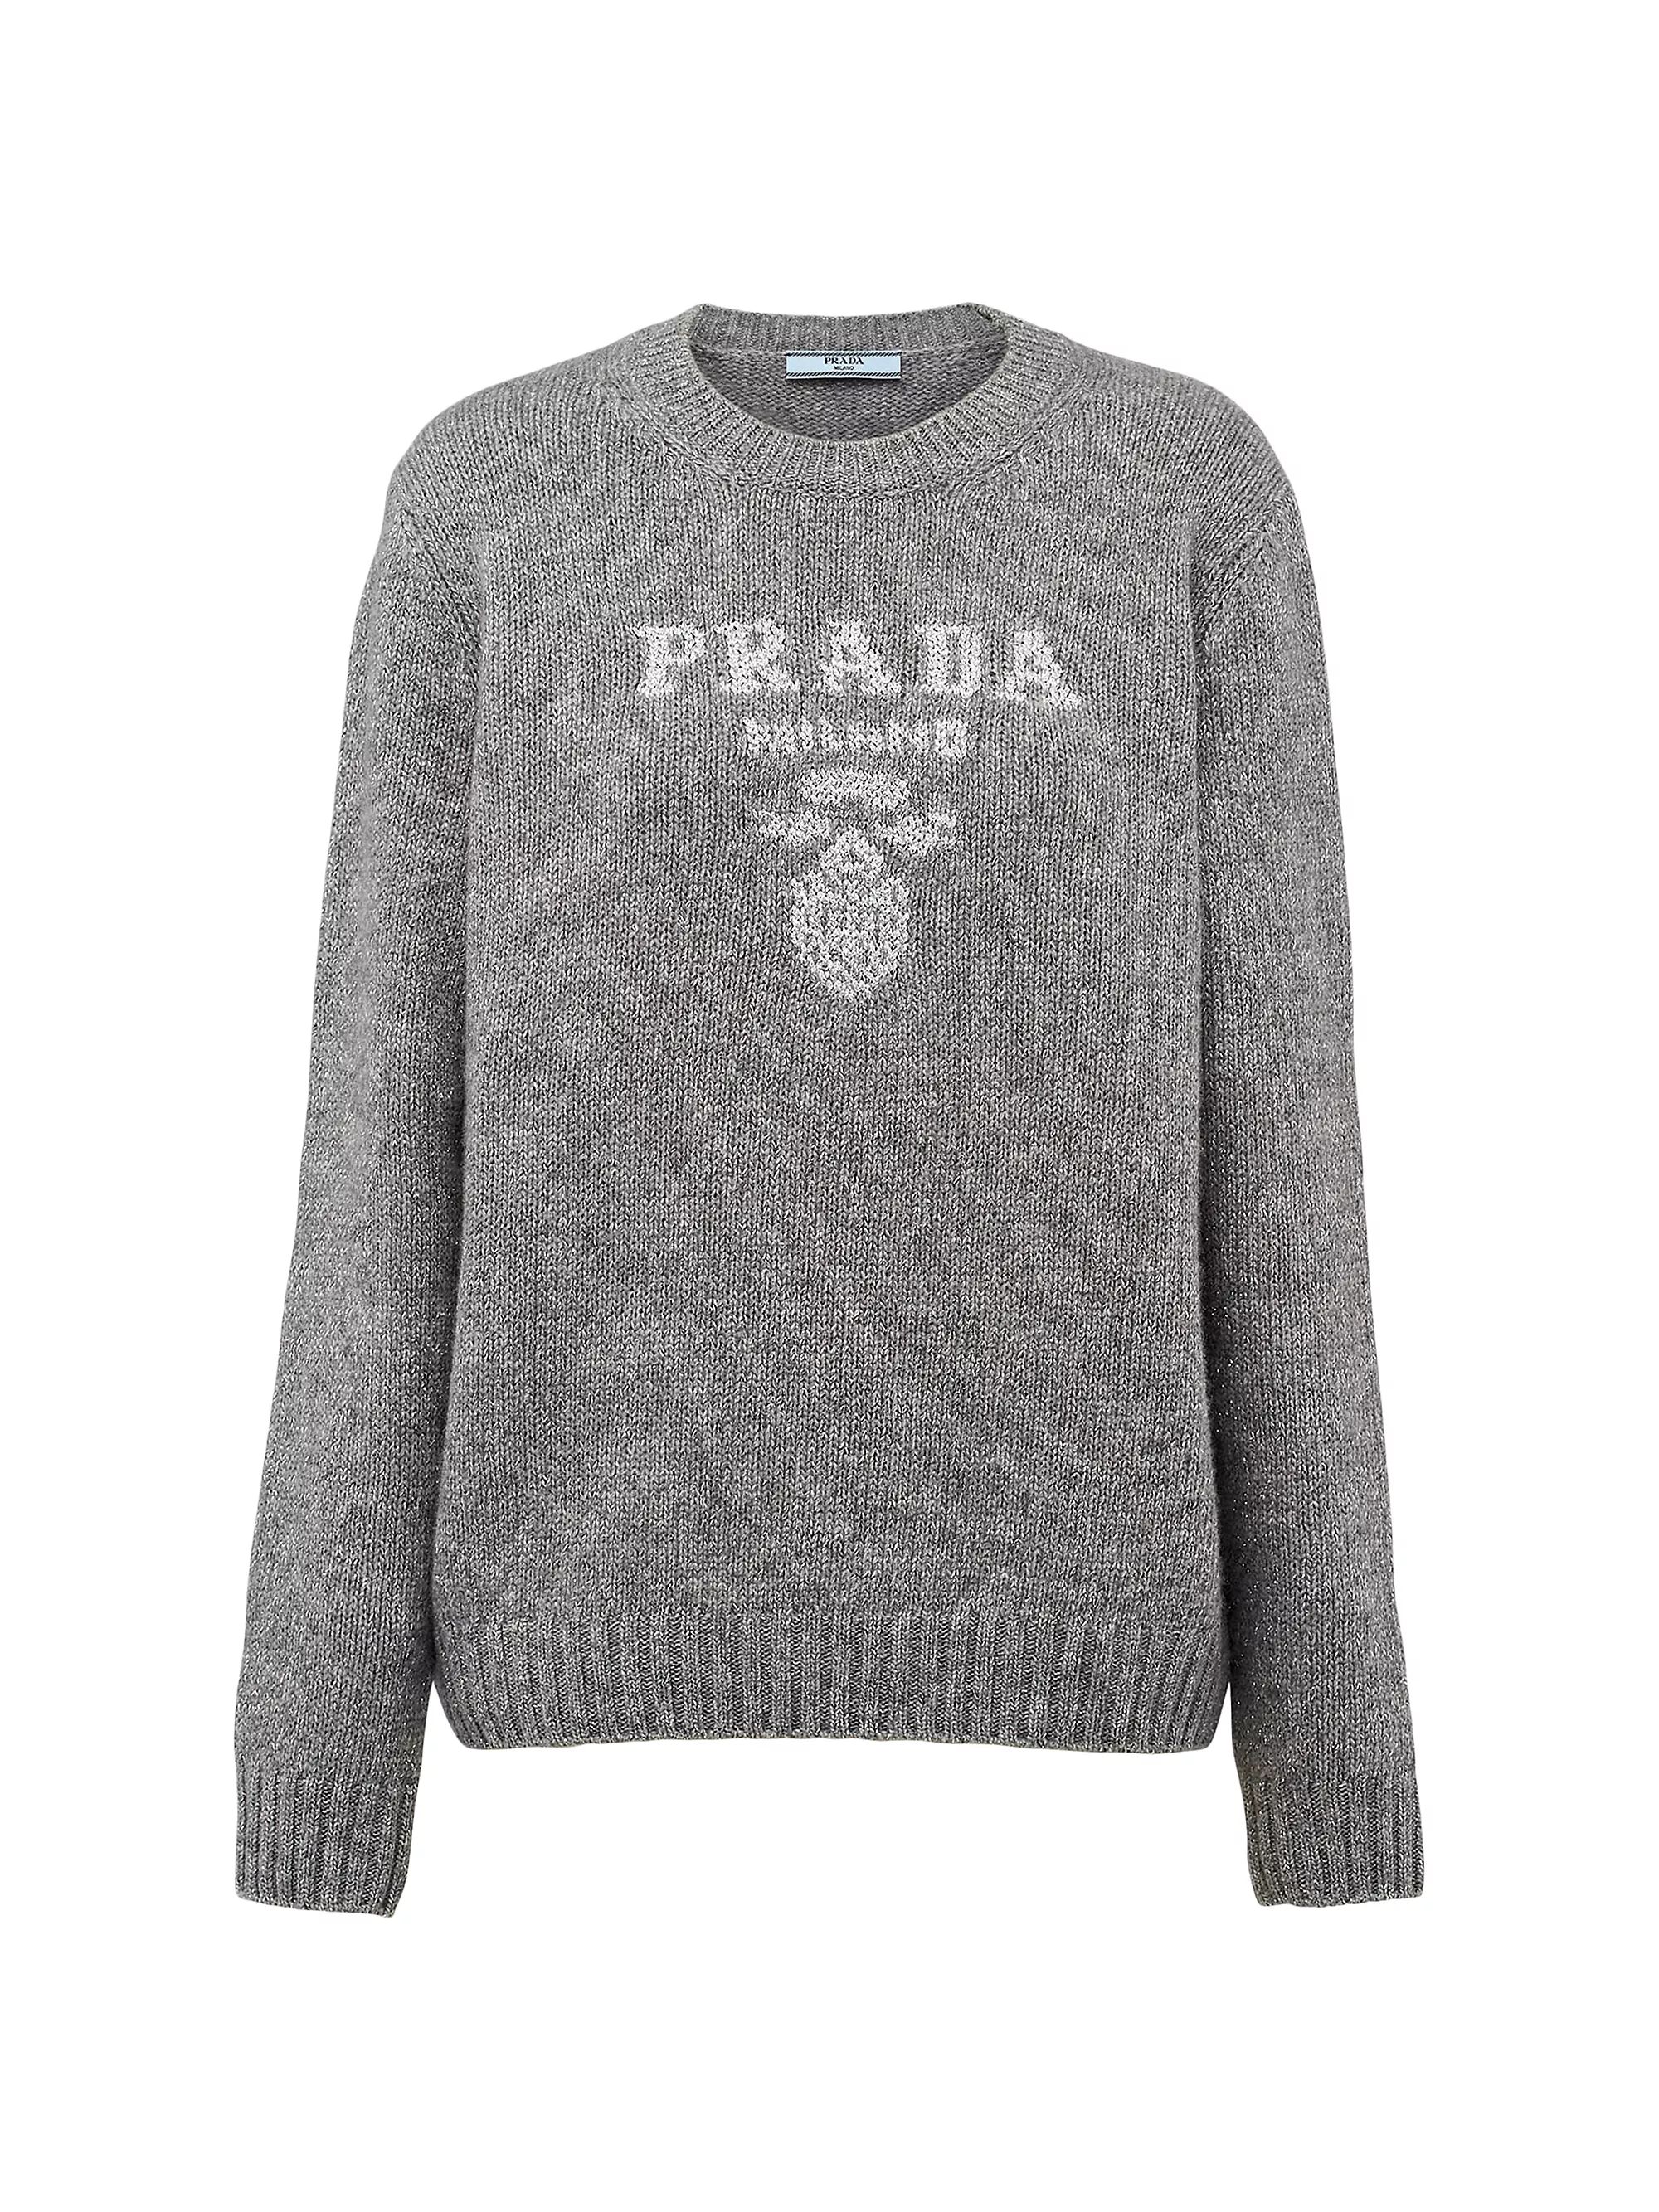 Wool Cashmere and Lamé Crew-Neck Sweater | Saks Fifth Avenue